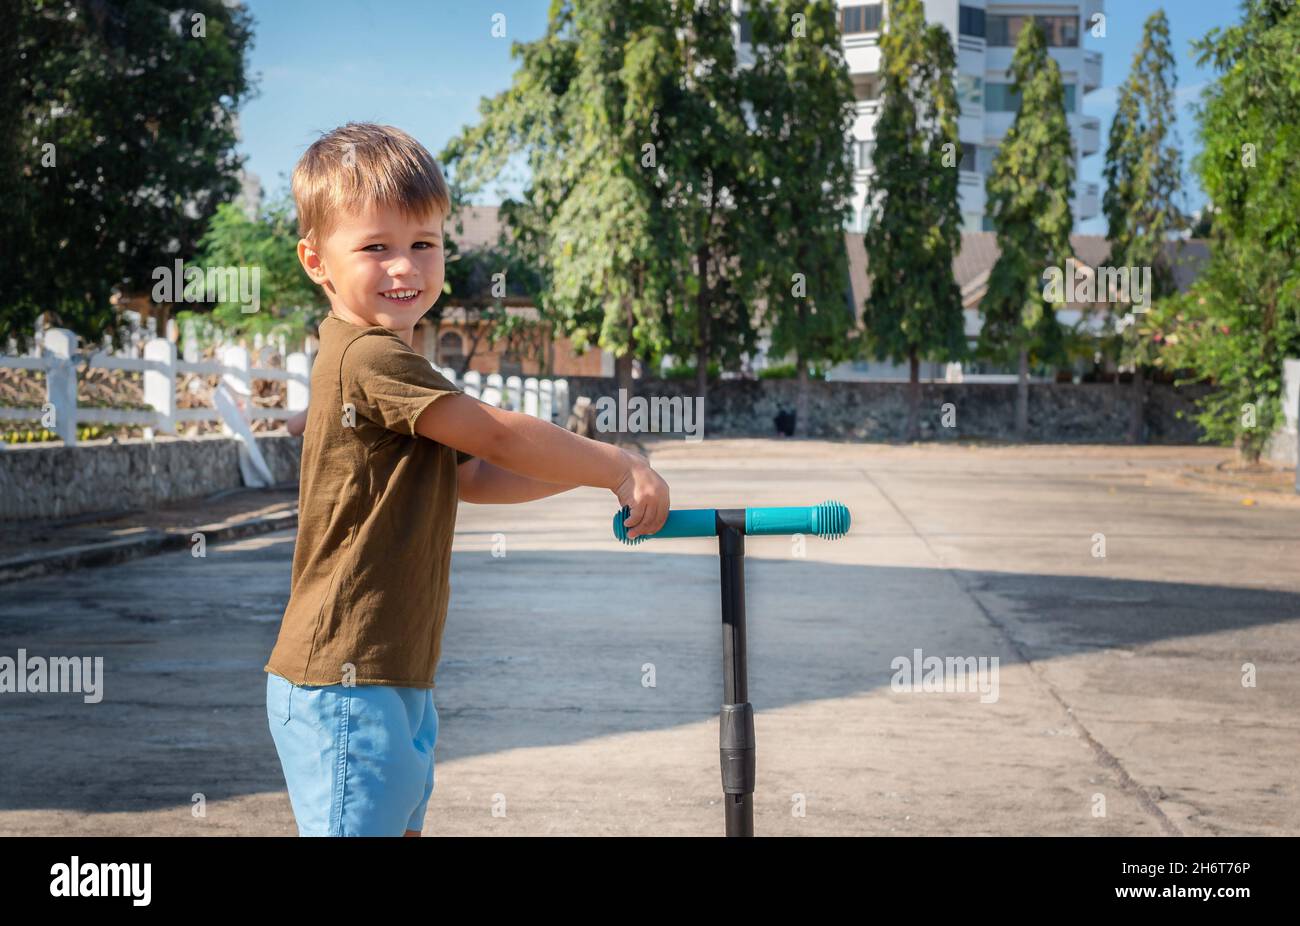 Portrait of a child with a scooter outside. The boy smiles and holds a scooter. Stock Photo